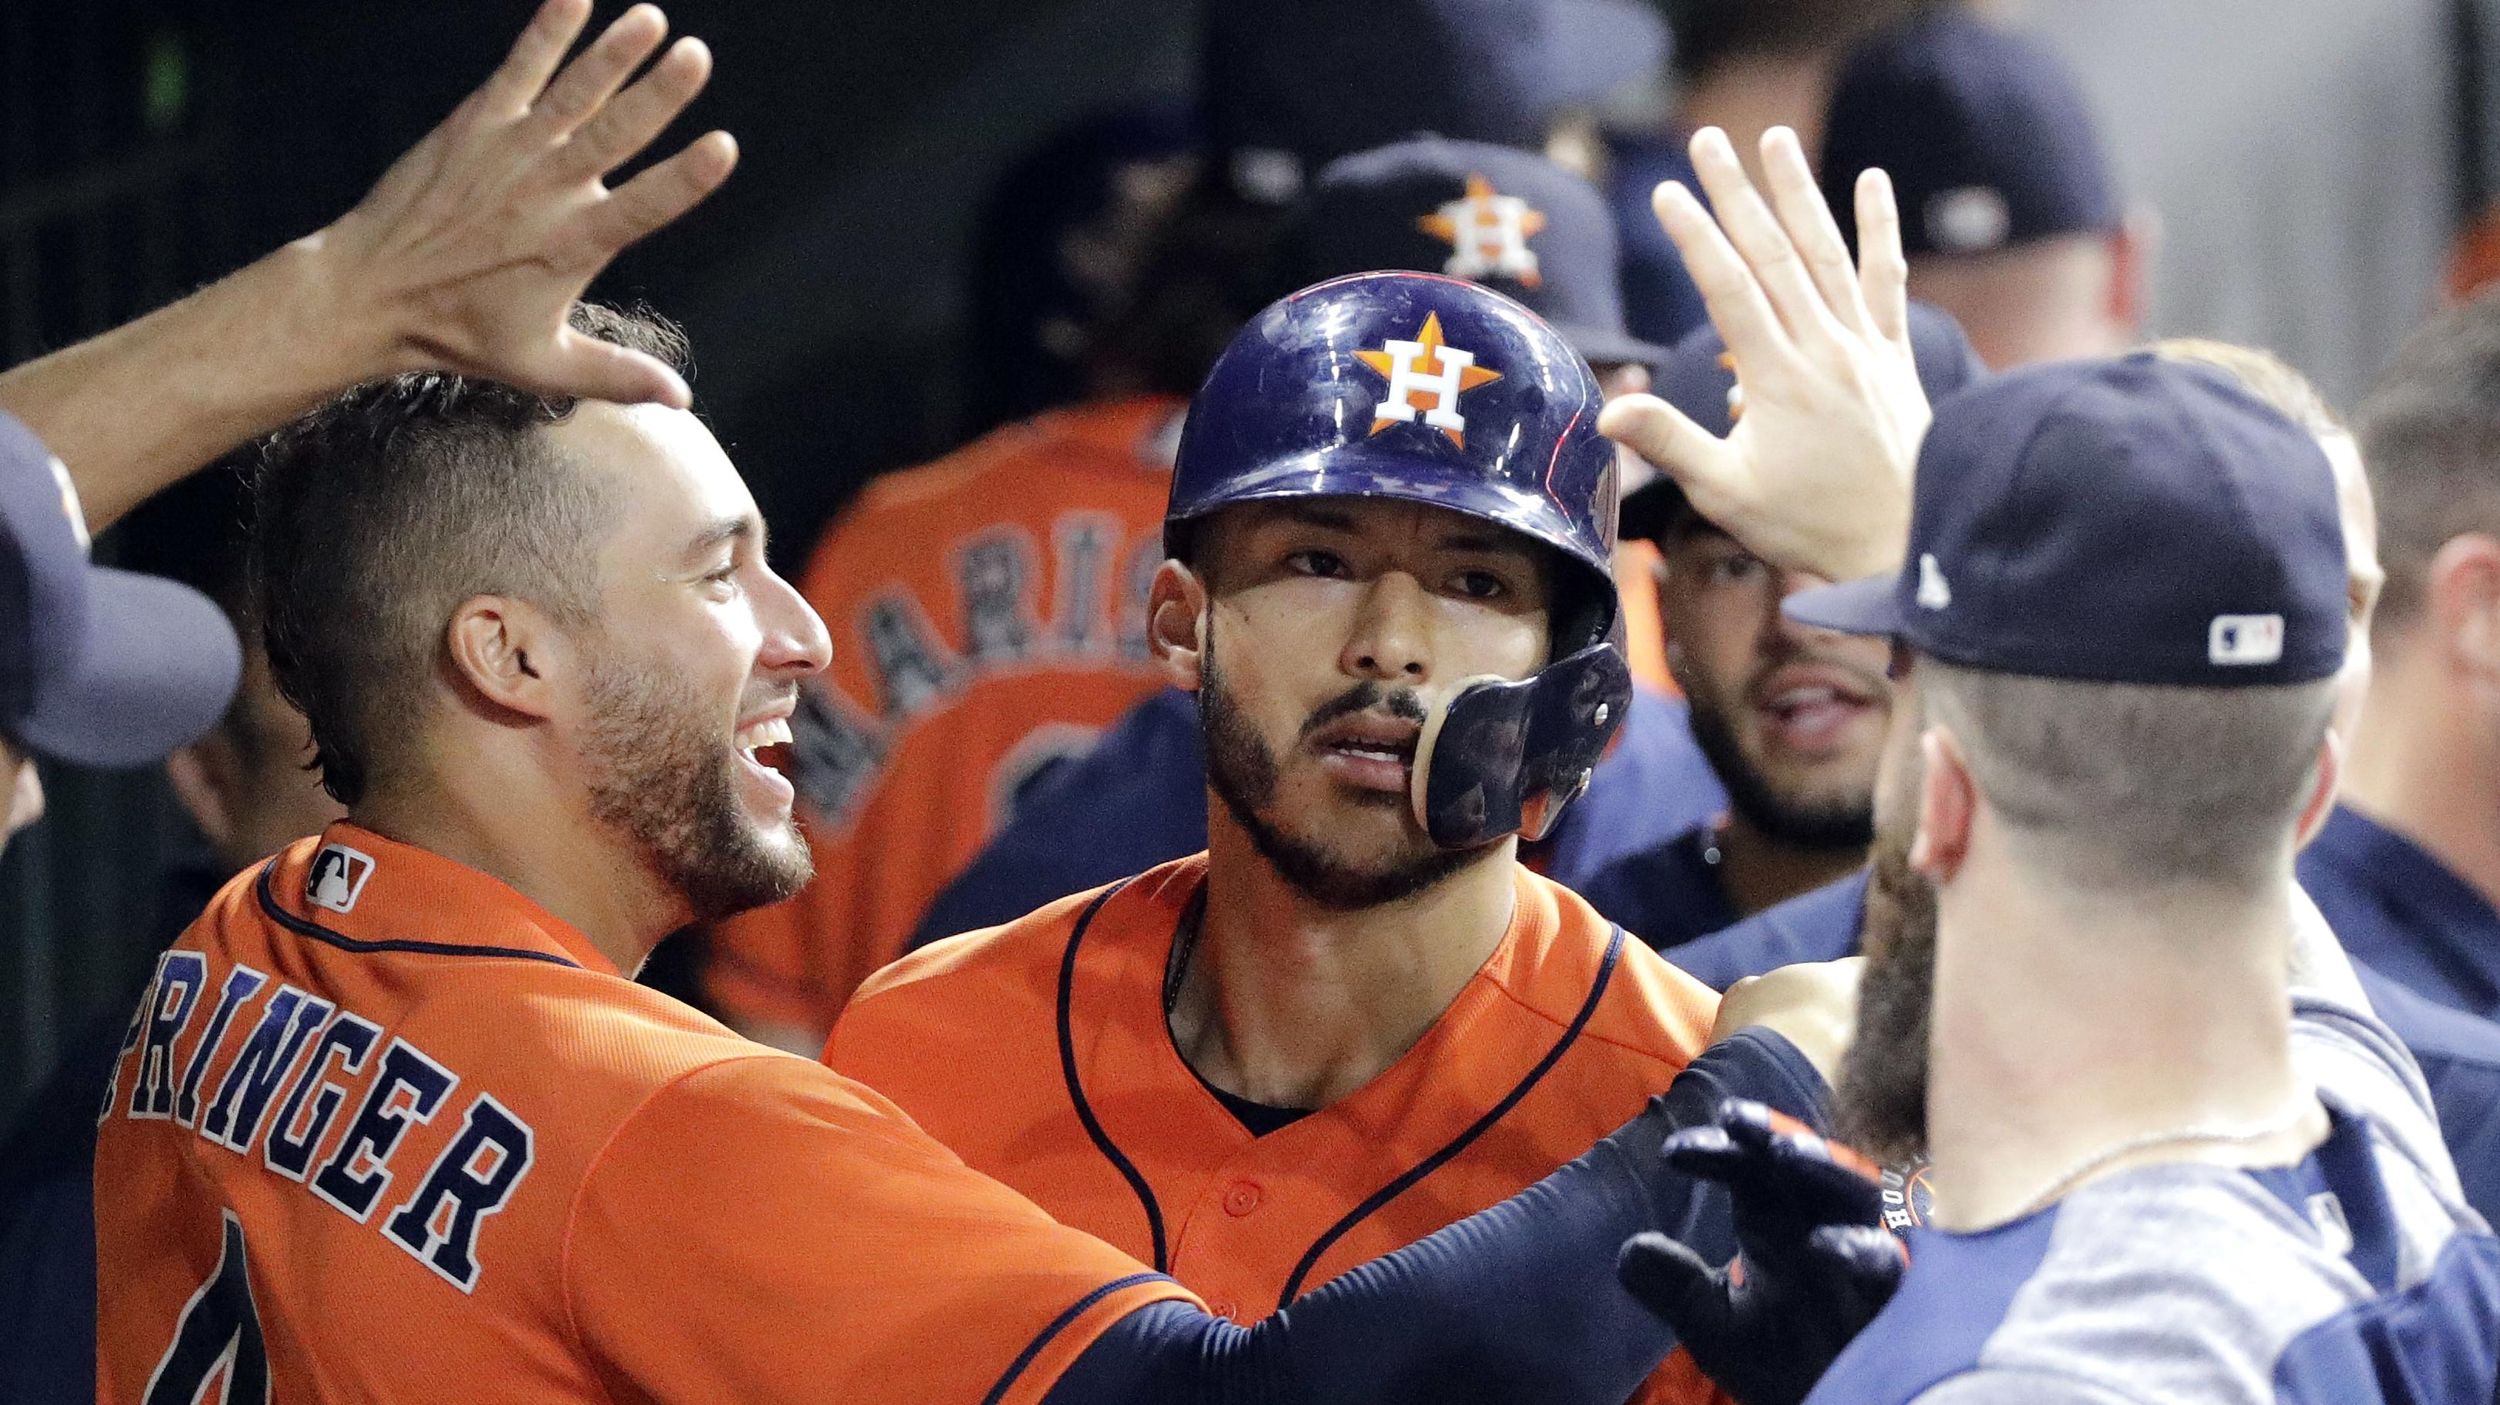 The Astros Are Built to Survive Carlos Correa's Injury - The Ringer